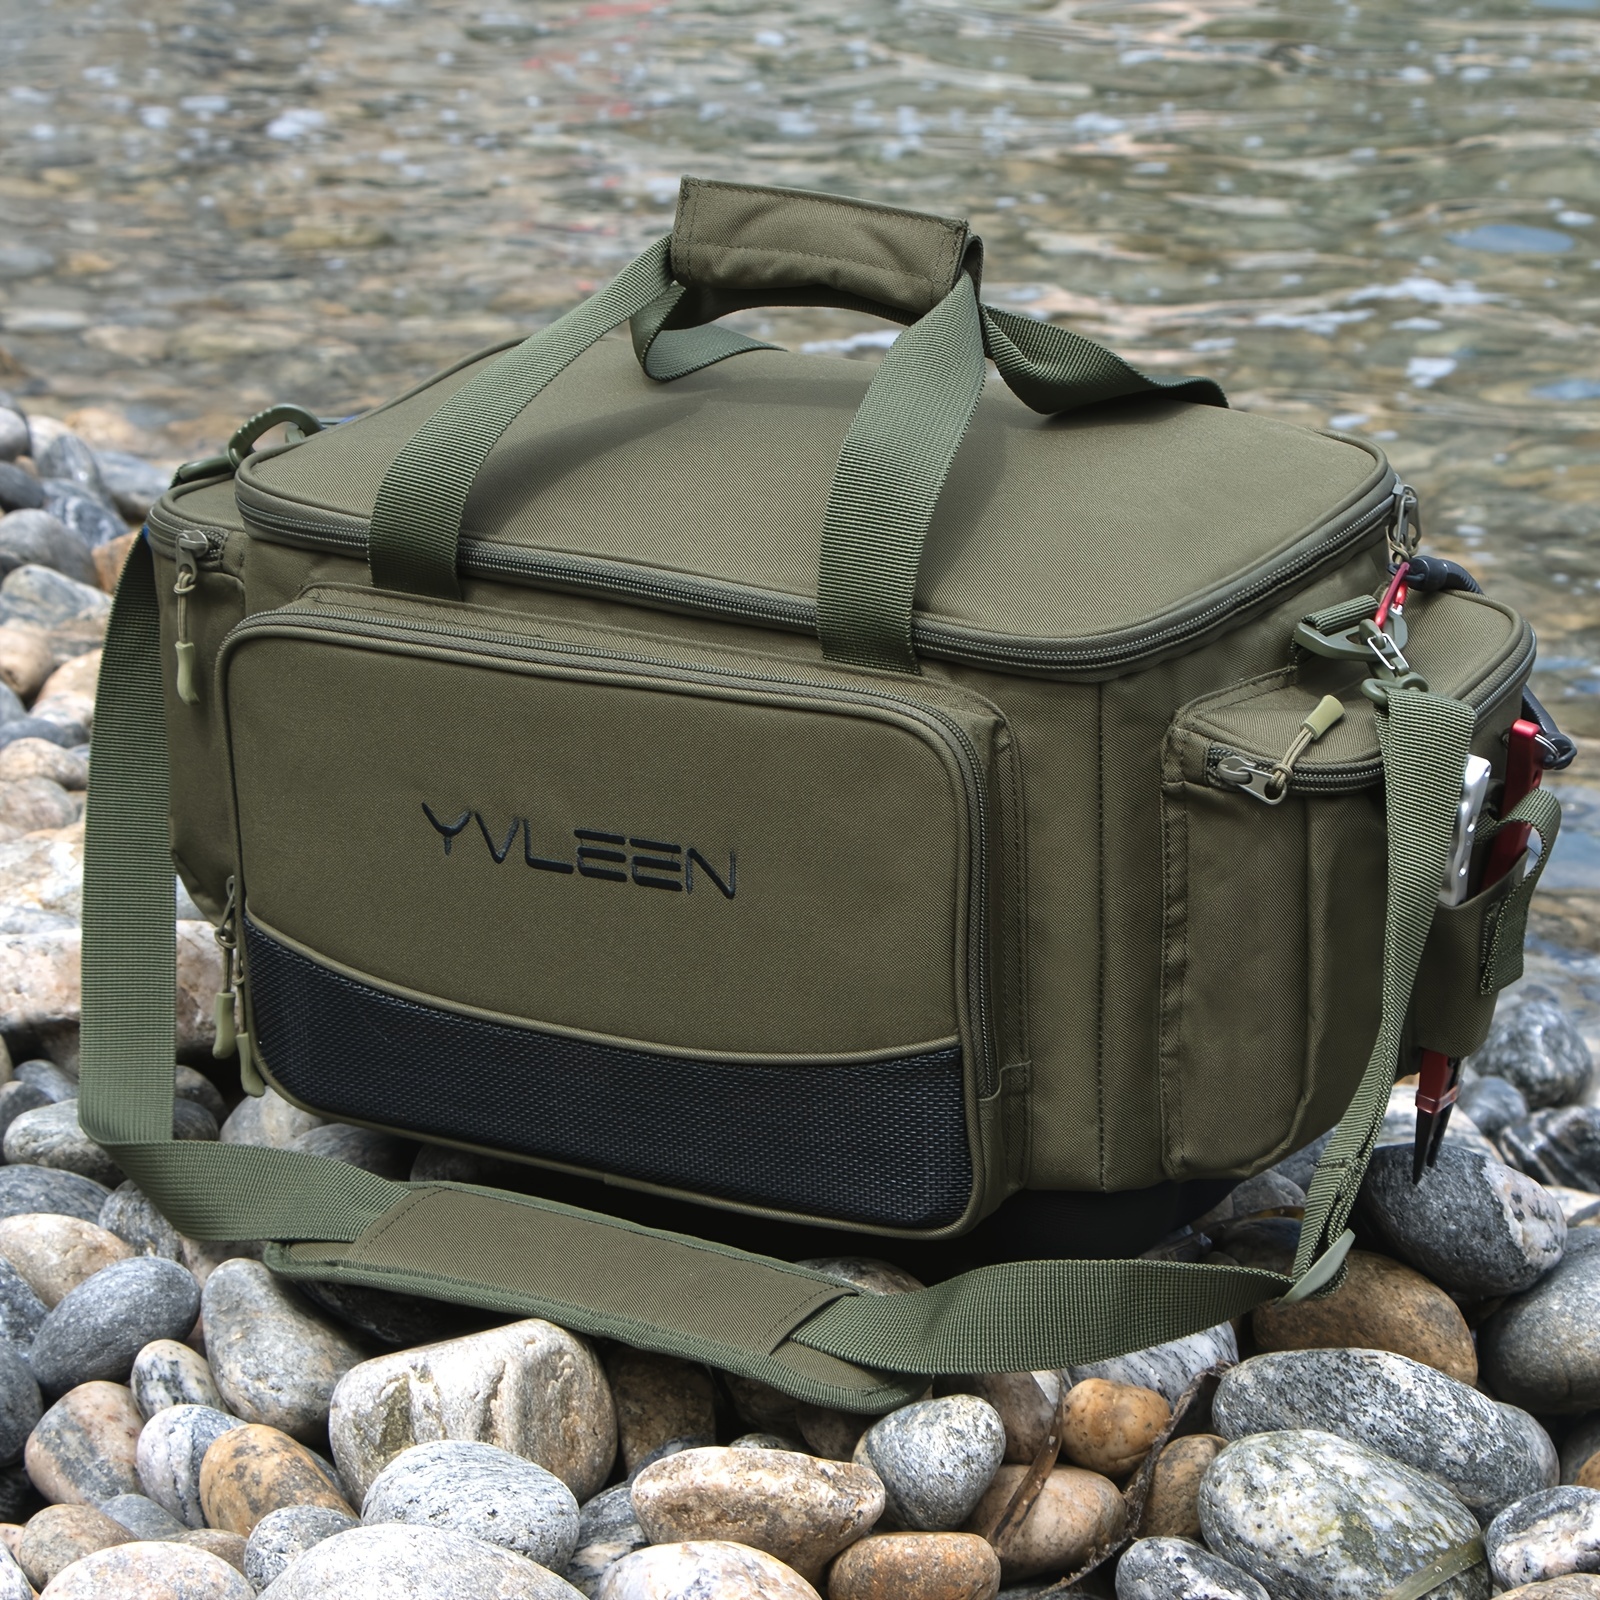 YVLEEN Fishing Tackle Box Bag - Outdoor Large Fishing Tackle Storage Bag -  100% Water-Resistant Polyester Material - Fishing Tackle Bags - Suitable  for 3600 3700 Tackle Box : Sports & Outdoors 